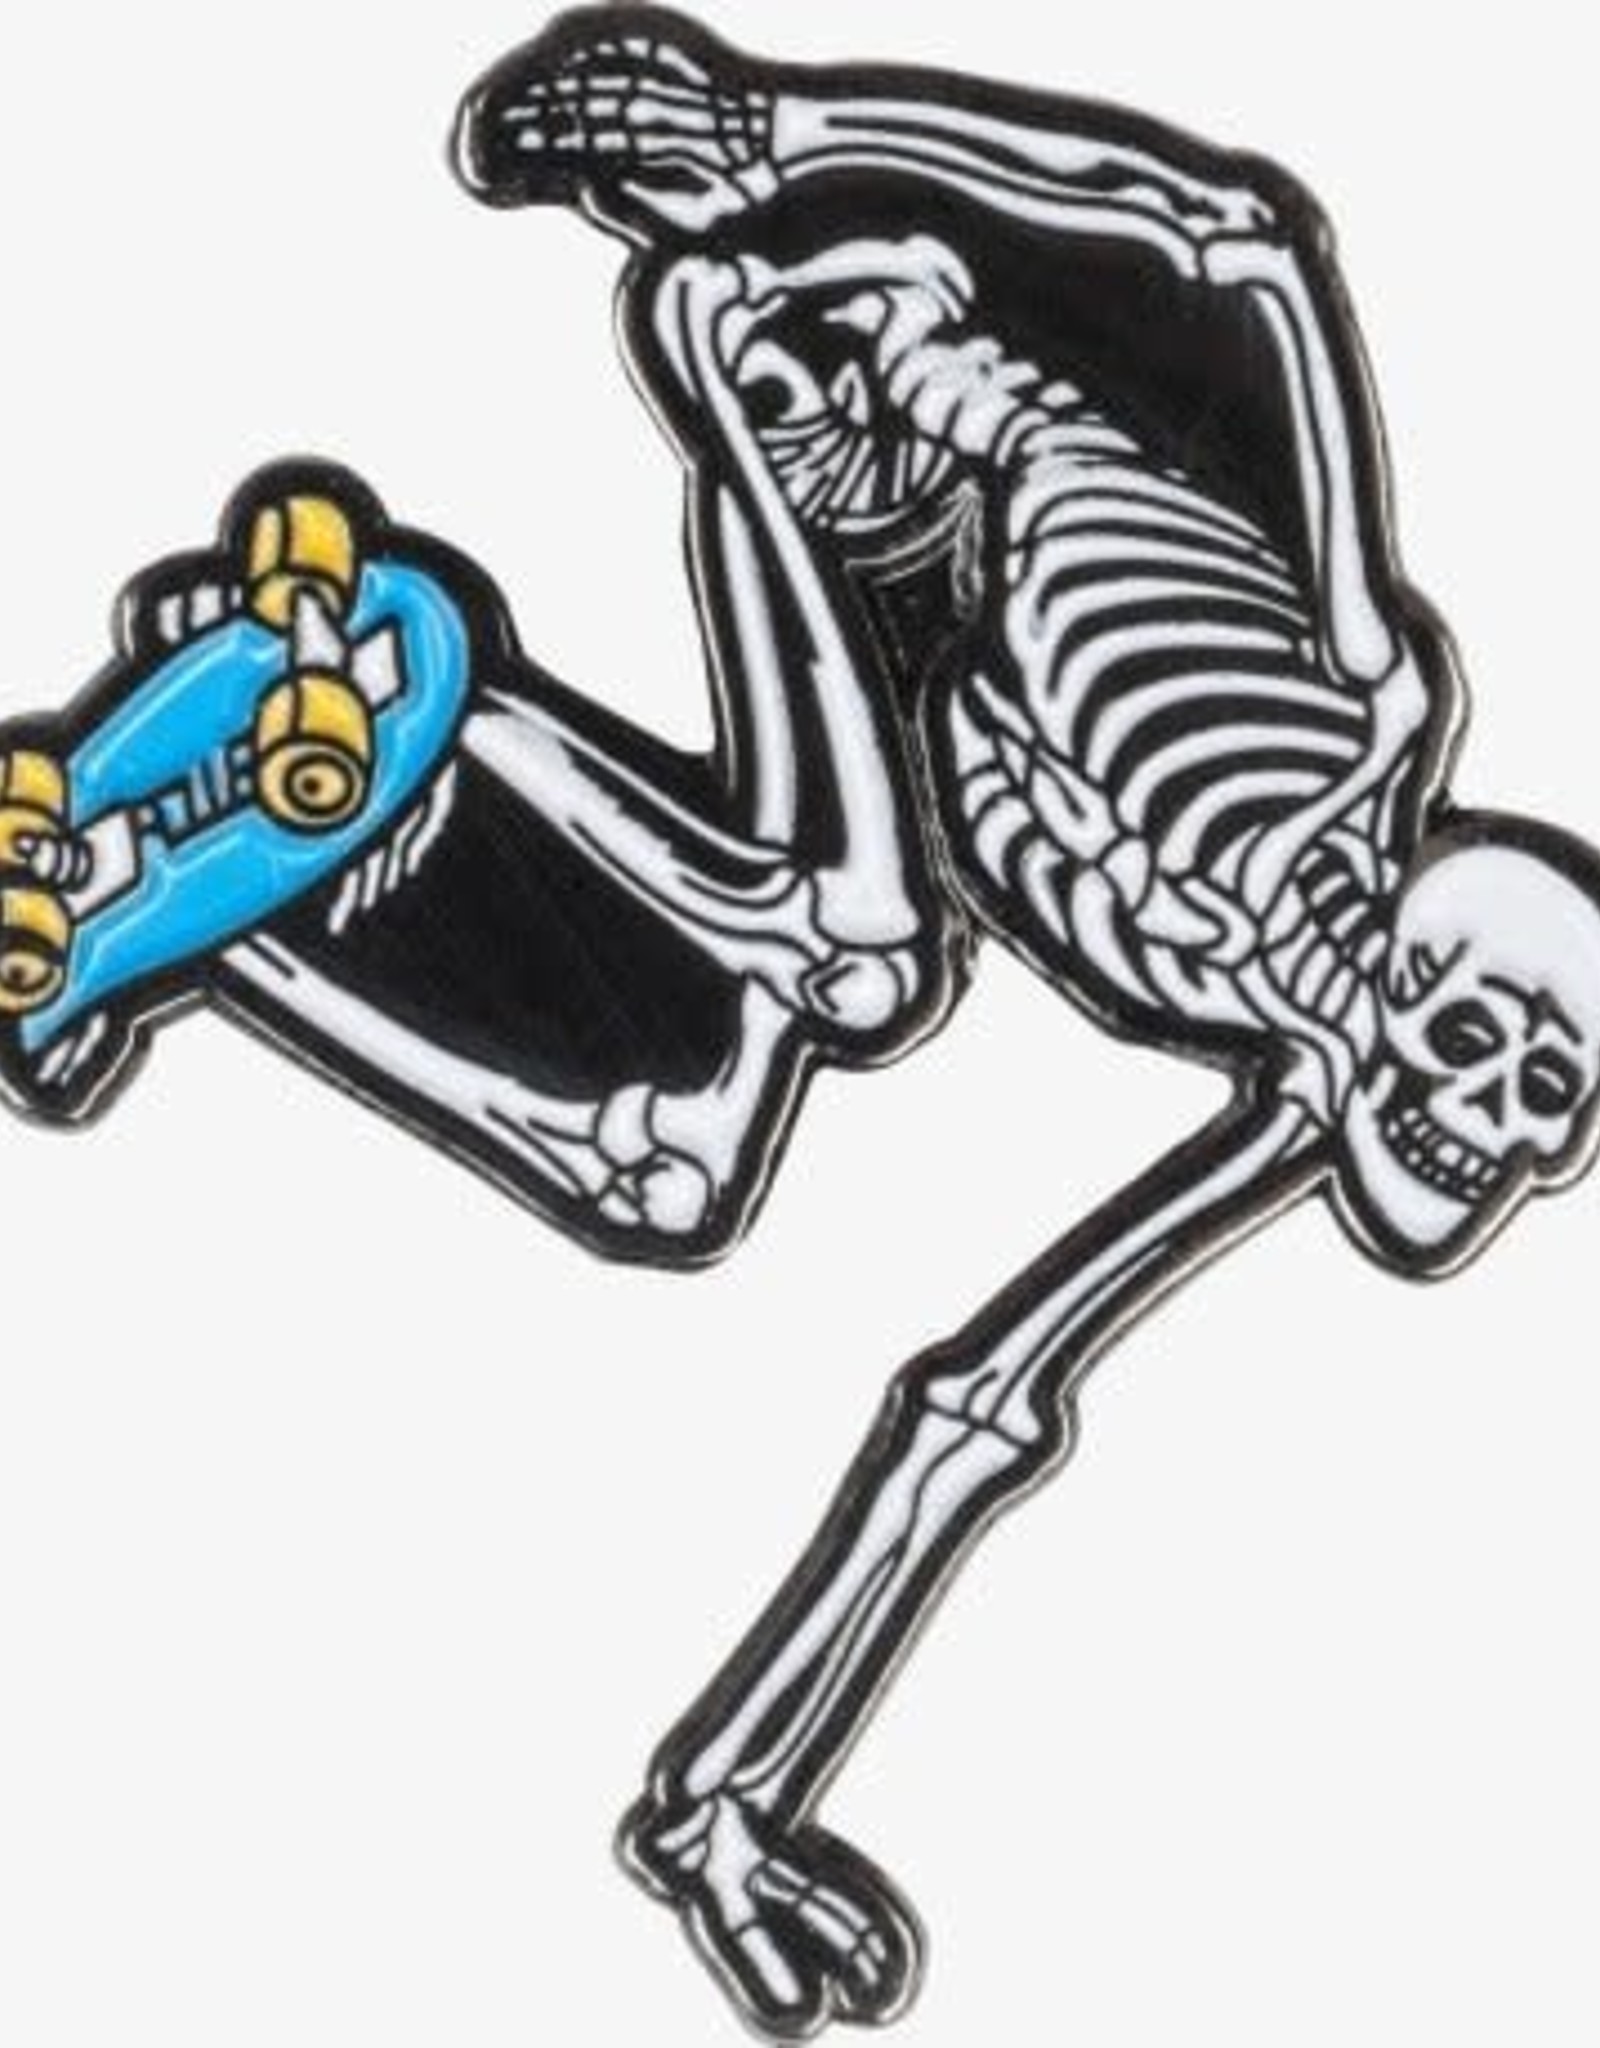 POWELL POWELL SKELETON PIN (ASST COLORS)